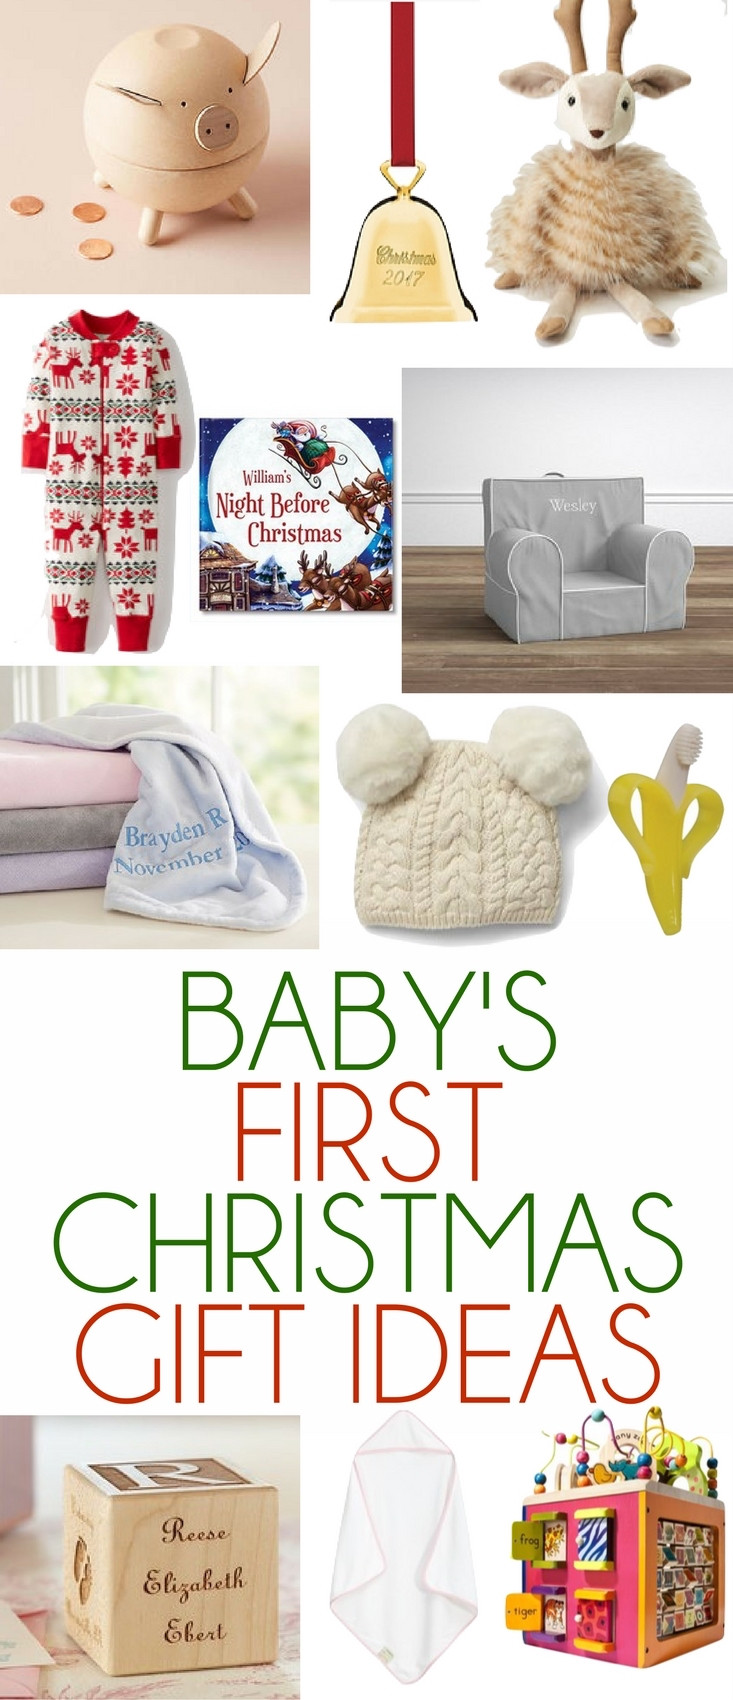 Christmas Gift Ideas From Baby
 Baby s First Christmas Gift Ideas Lovely Lucky Life